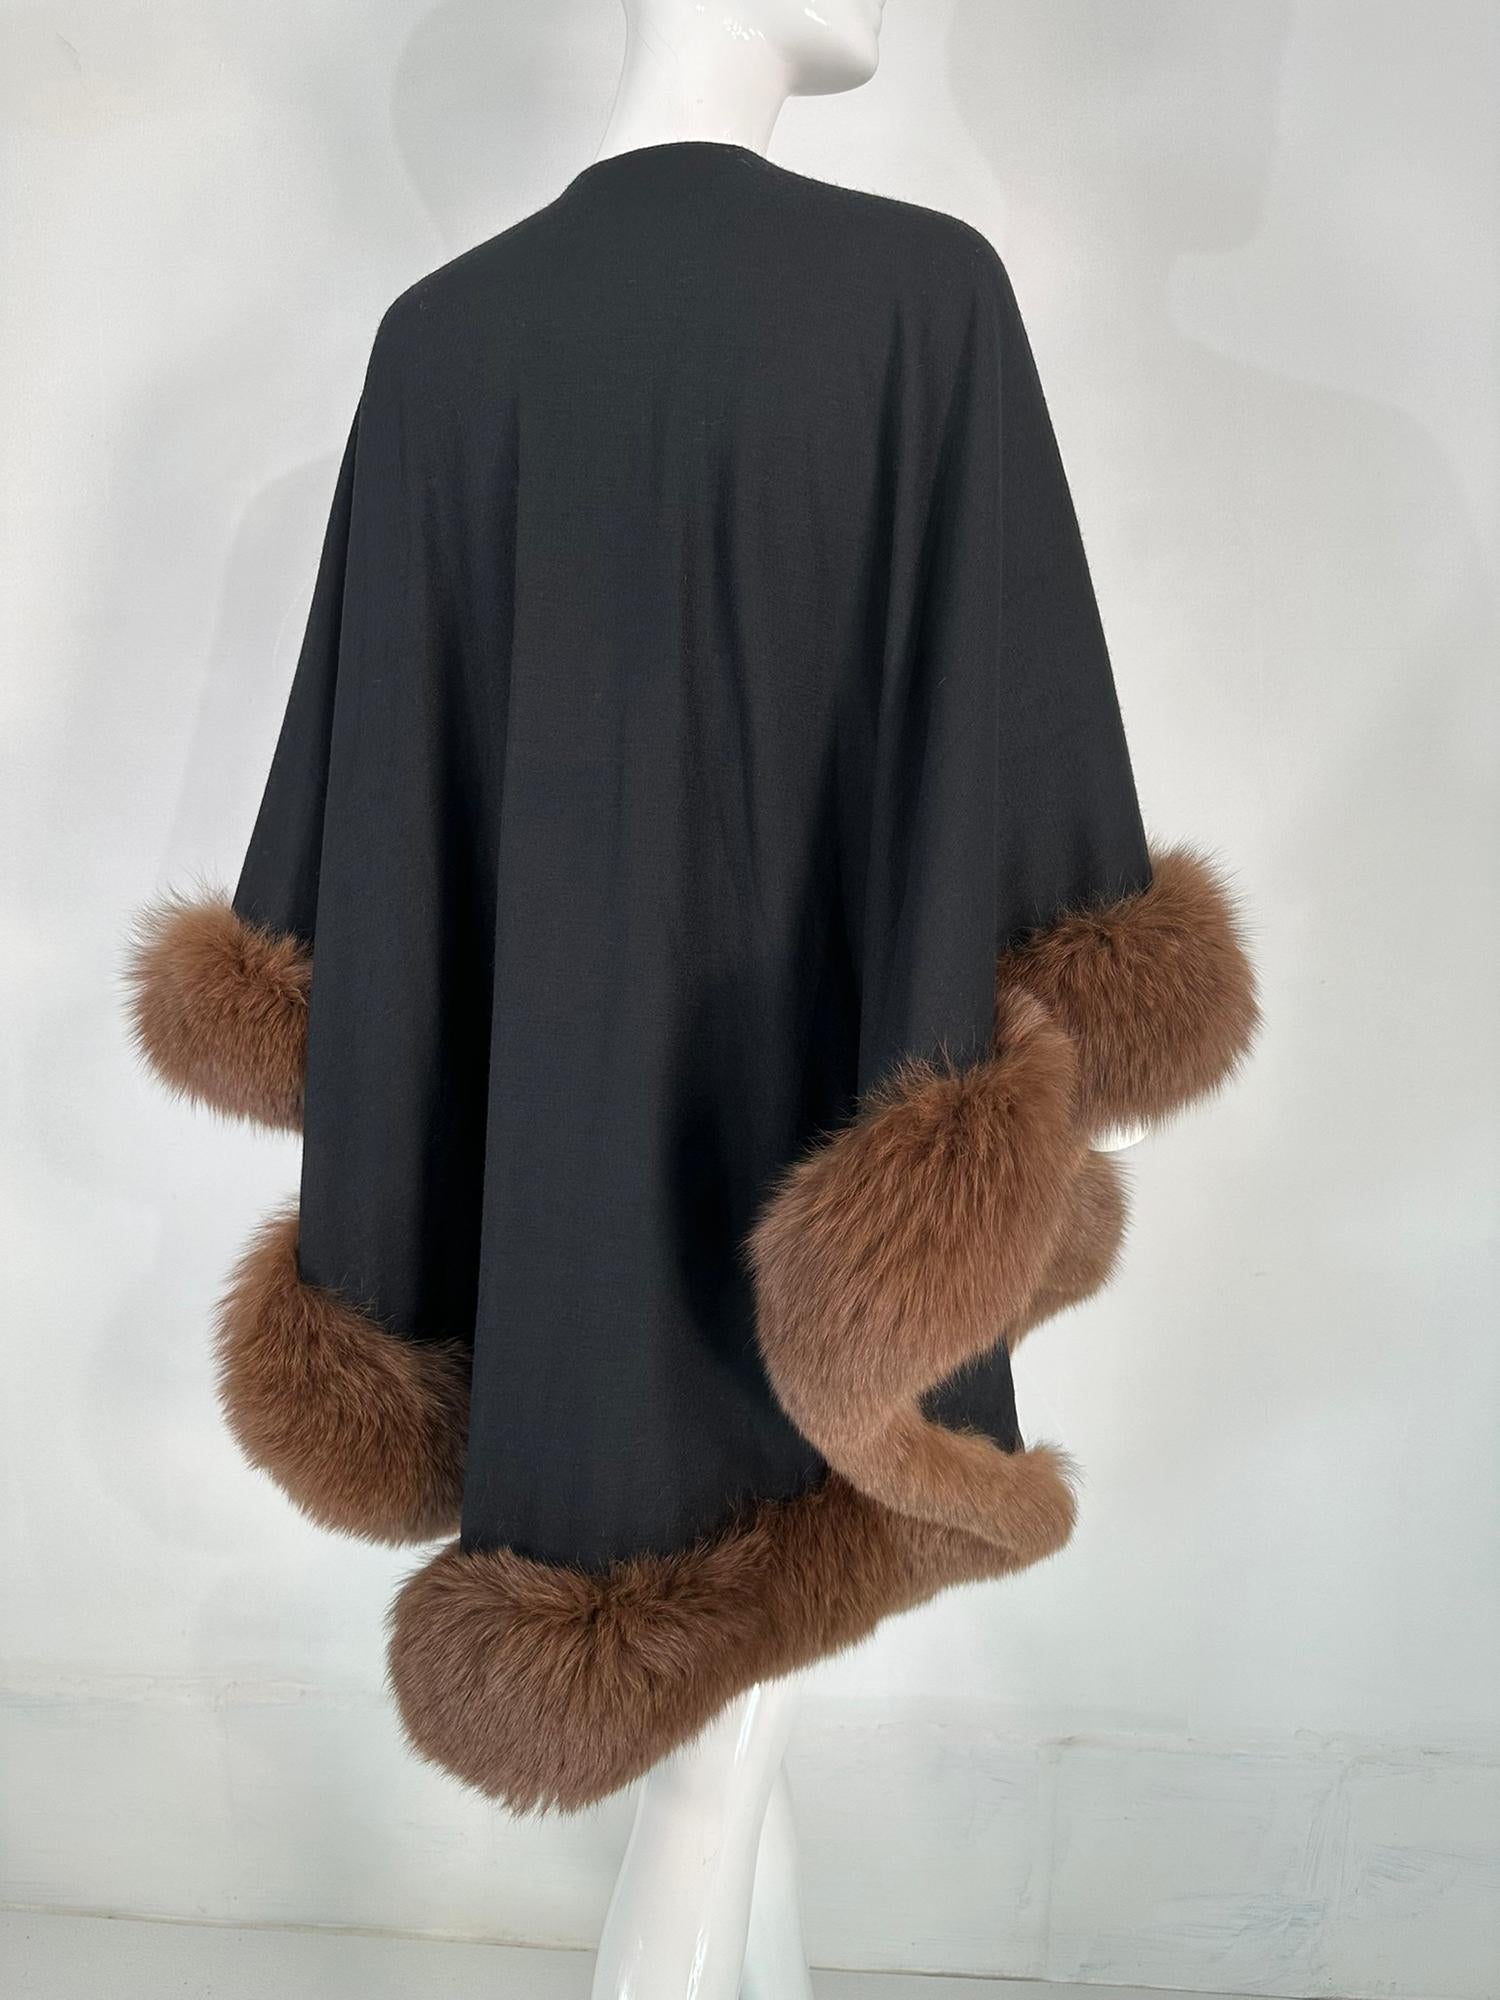 Adrienne Landau Sable Trimmed Black Wool knit Cape/Wrap From the 1990s For Sale 5